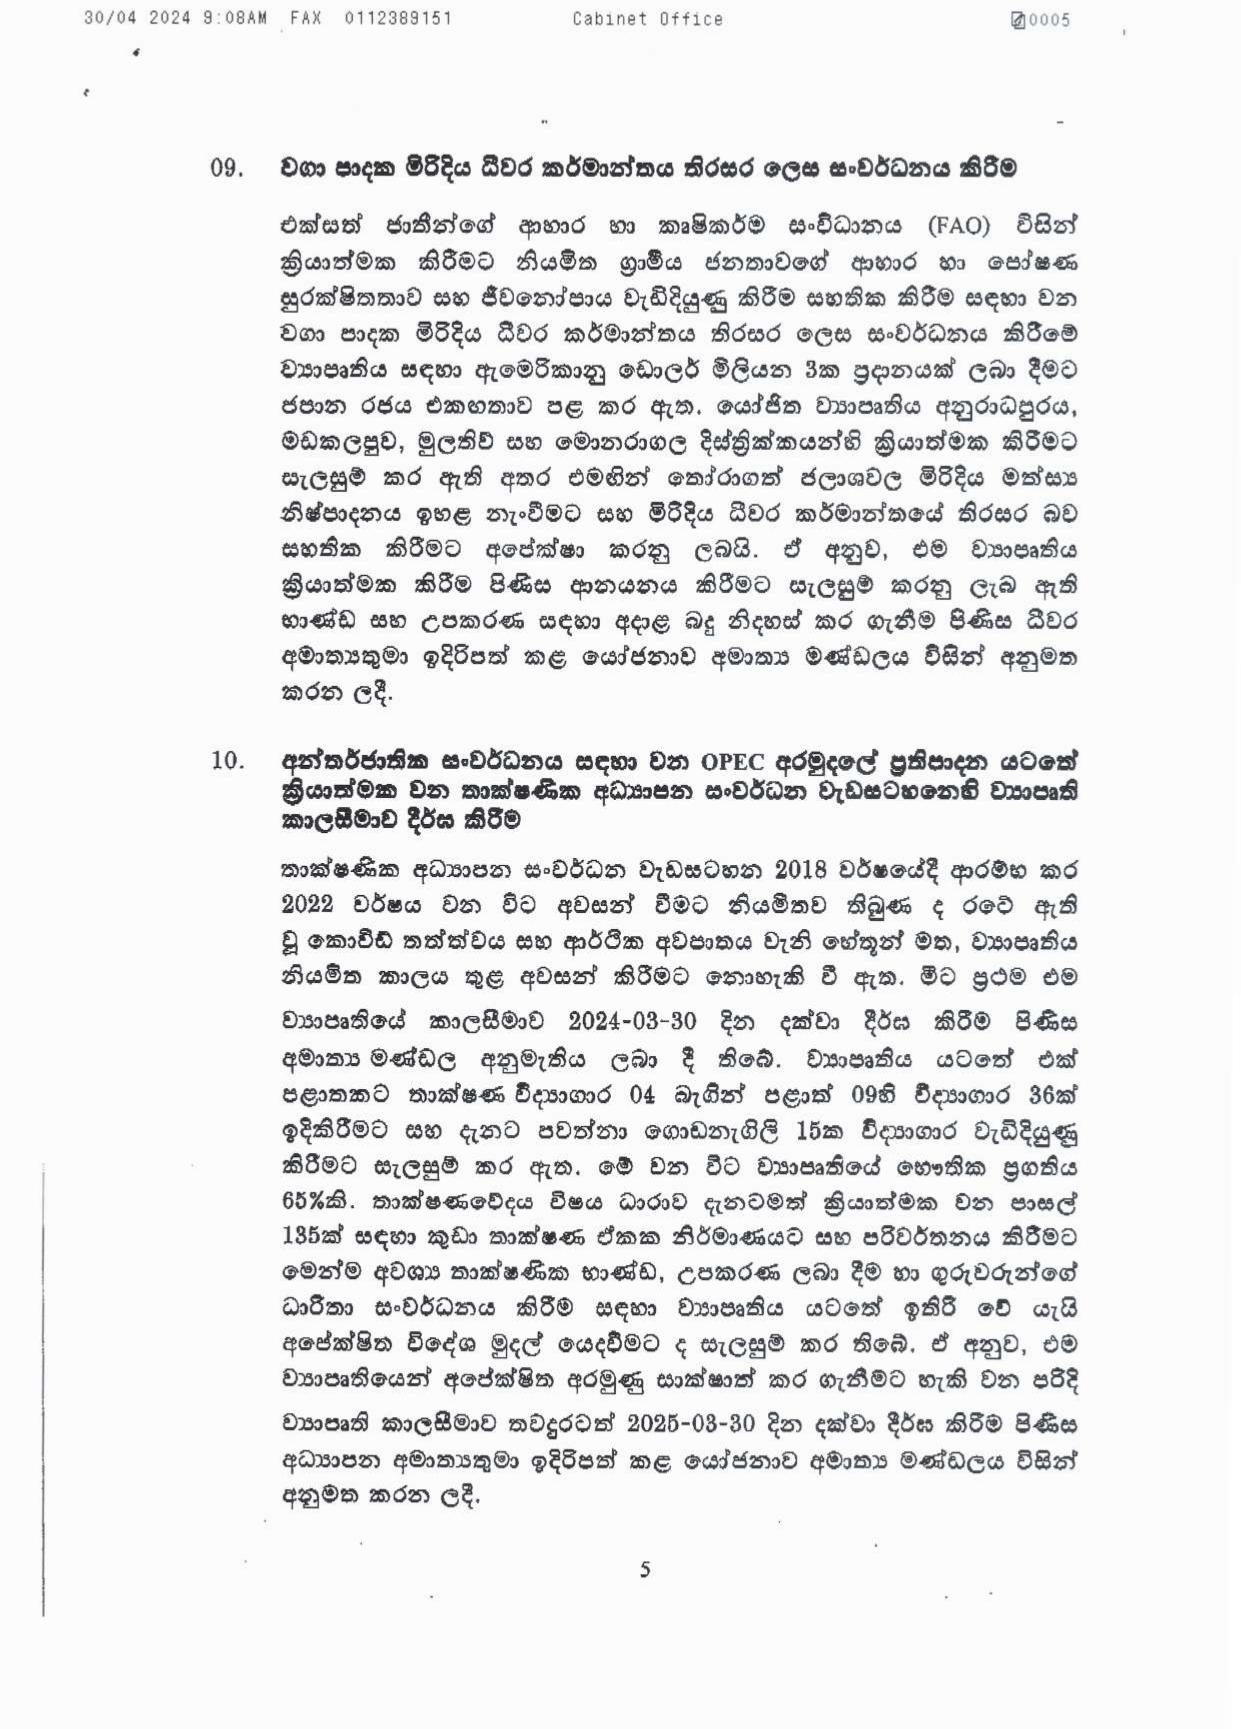 Cabinet Decision on 29.04.2024 page 0005